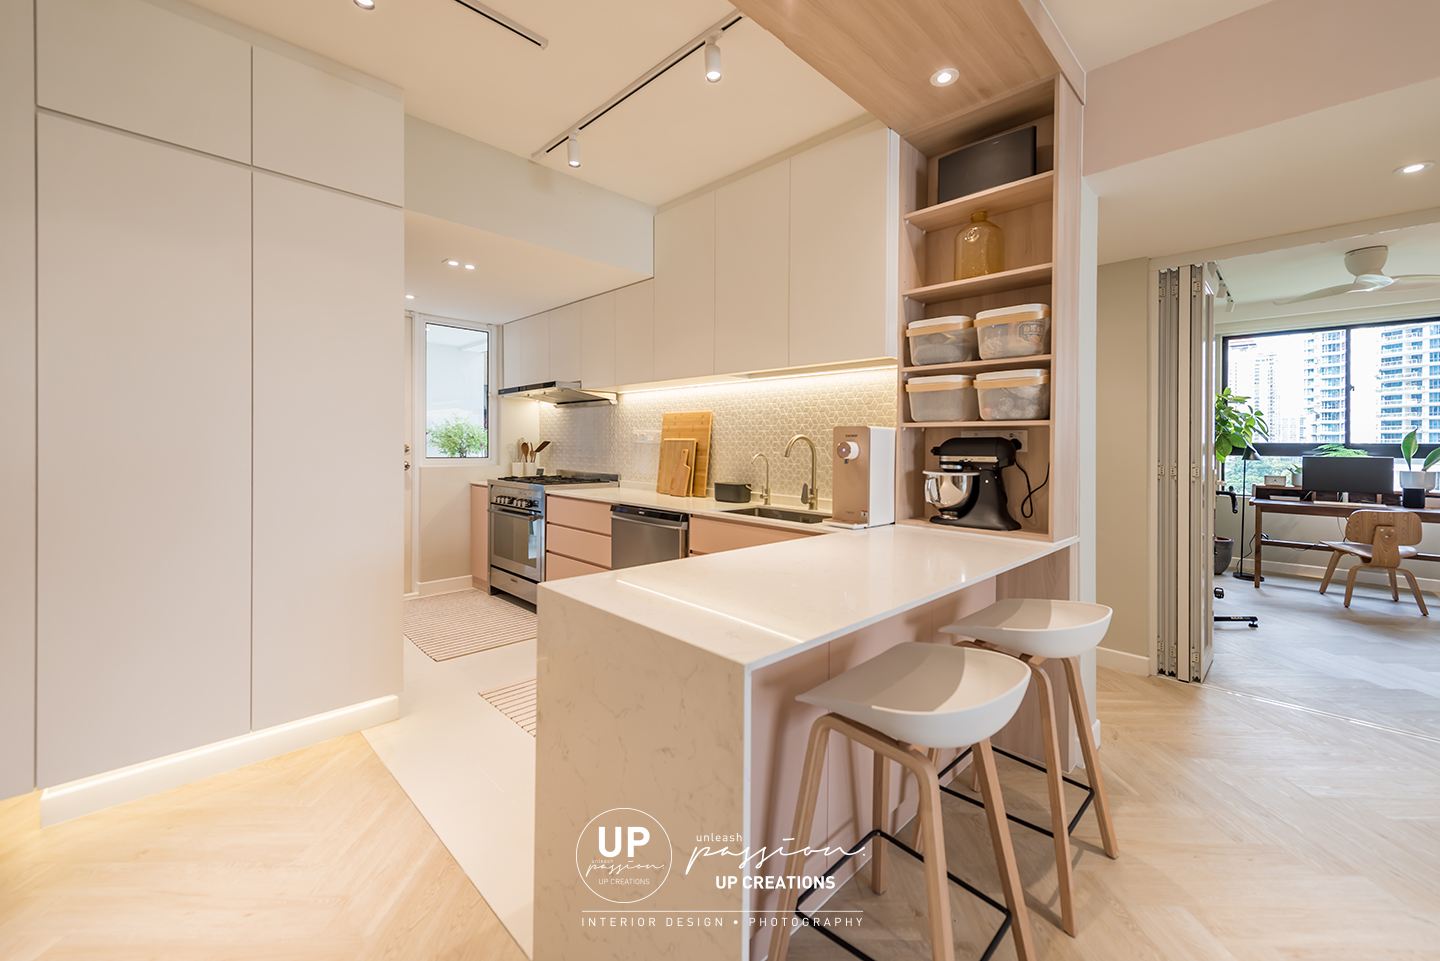 Mont Kiara Pines condo wood arch link with the kitchen open cabinet for decor